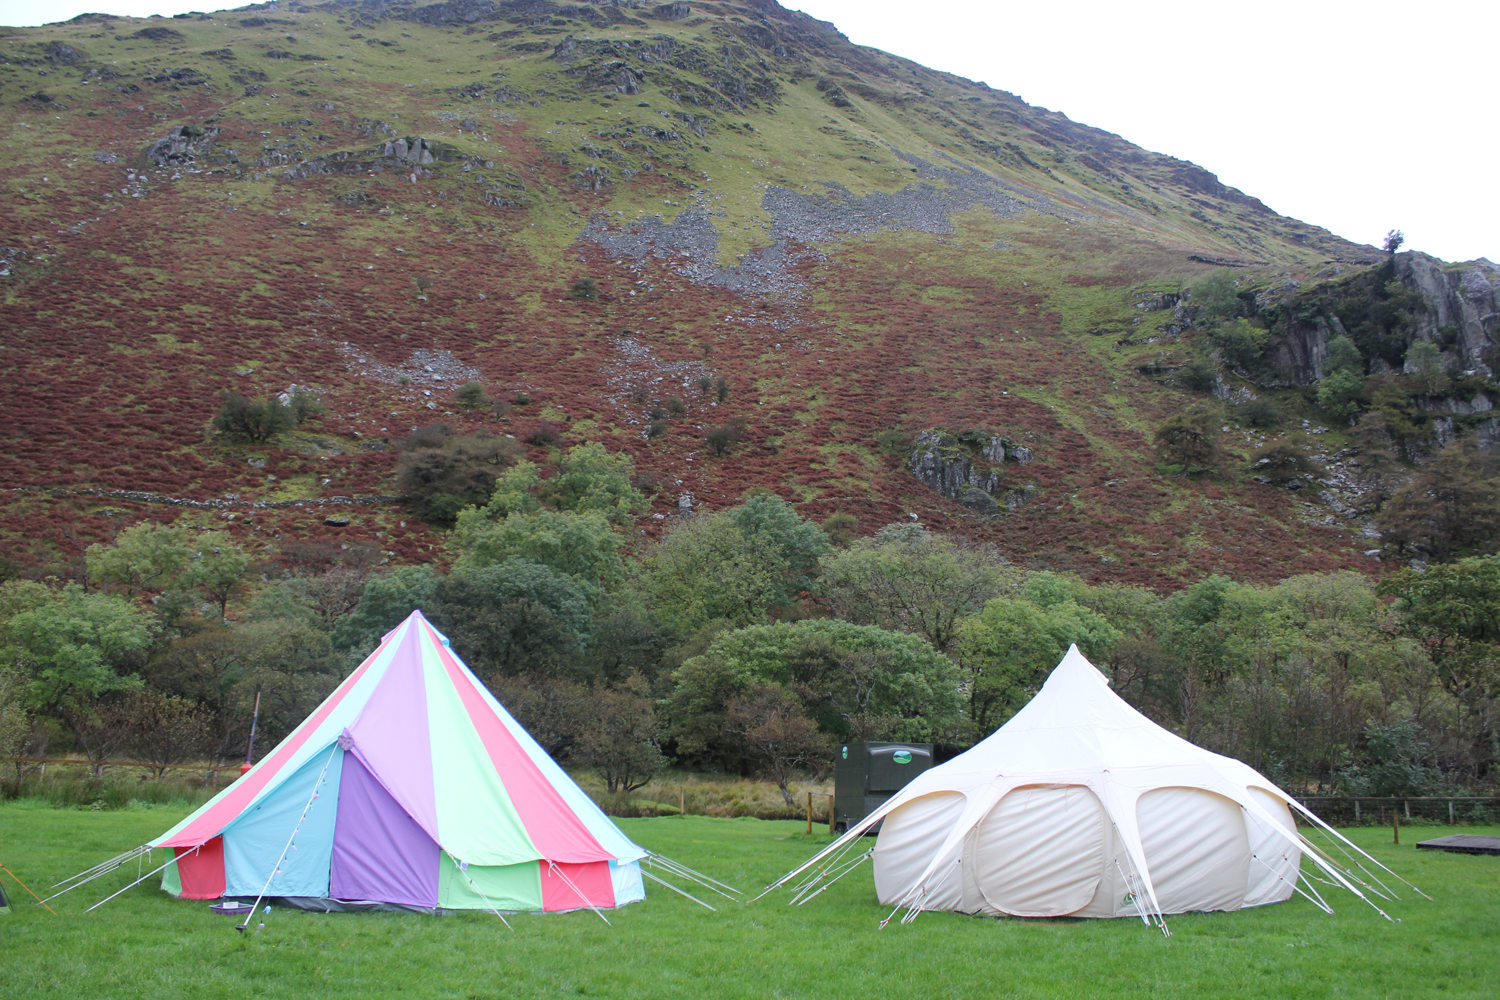 Tents pitched at the campsite 